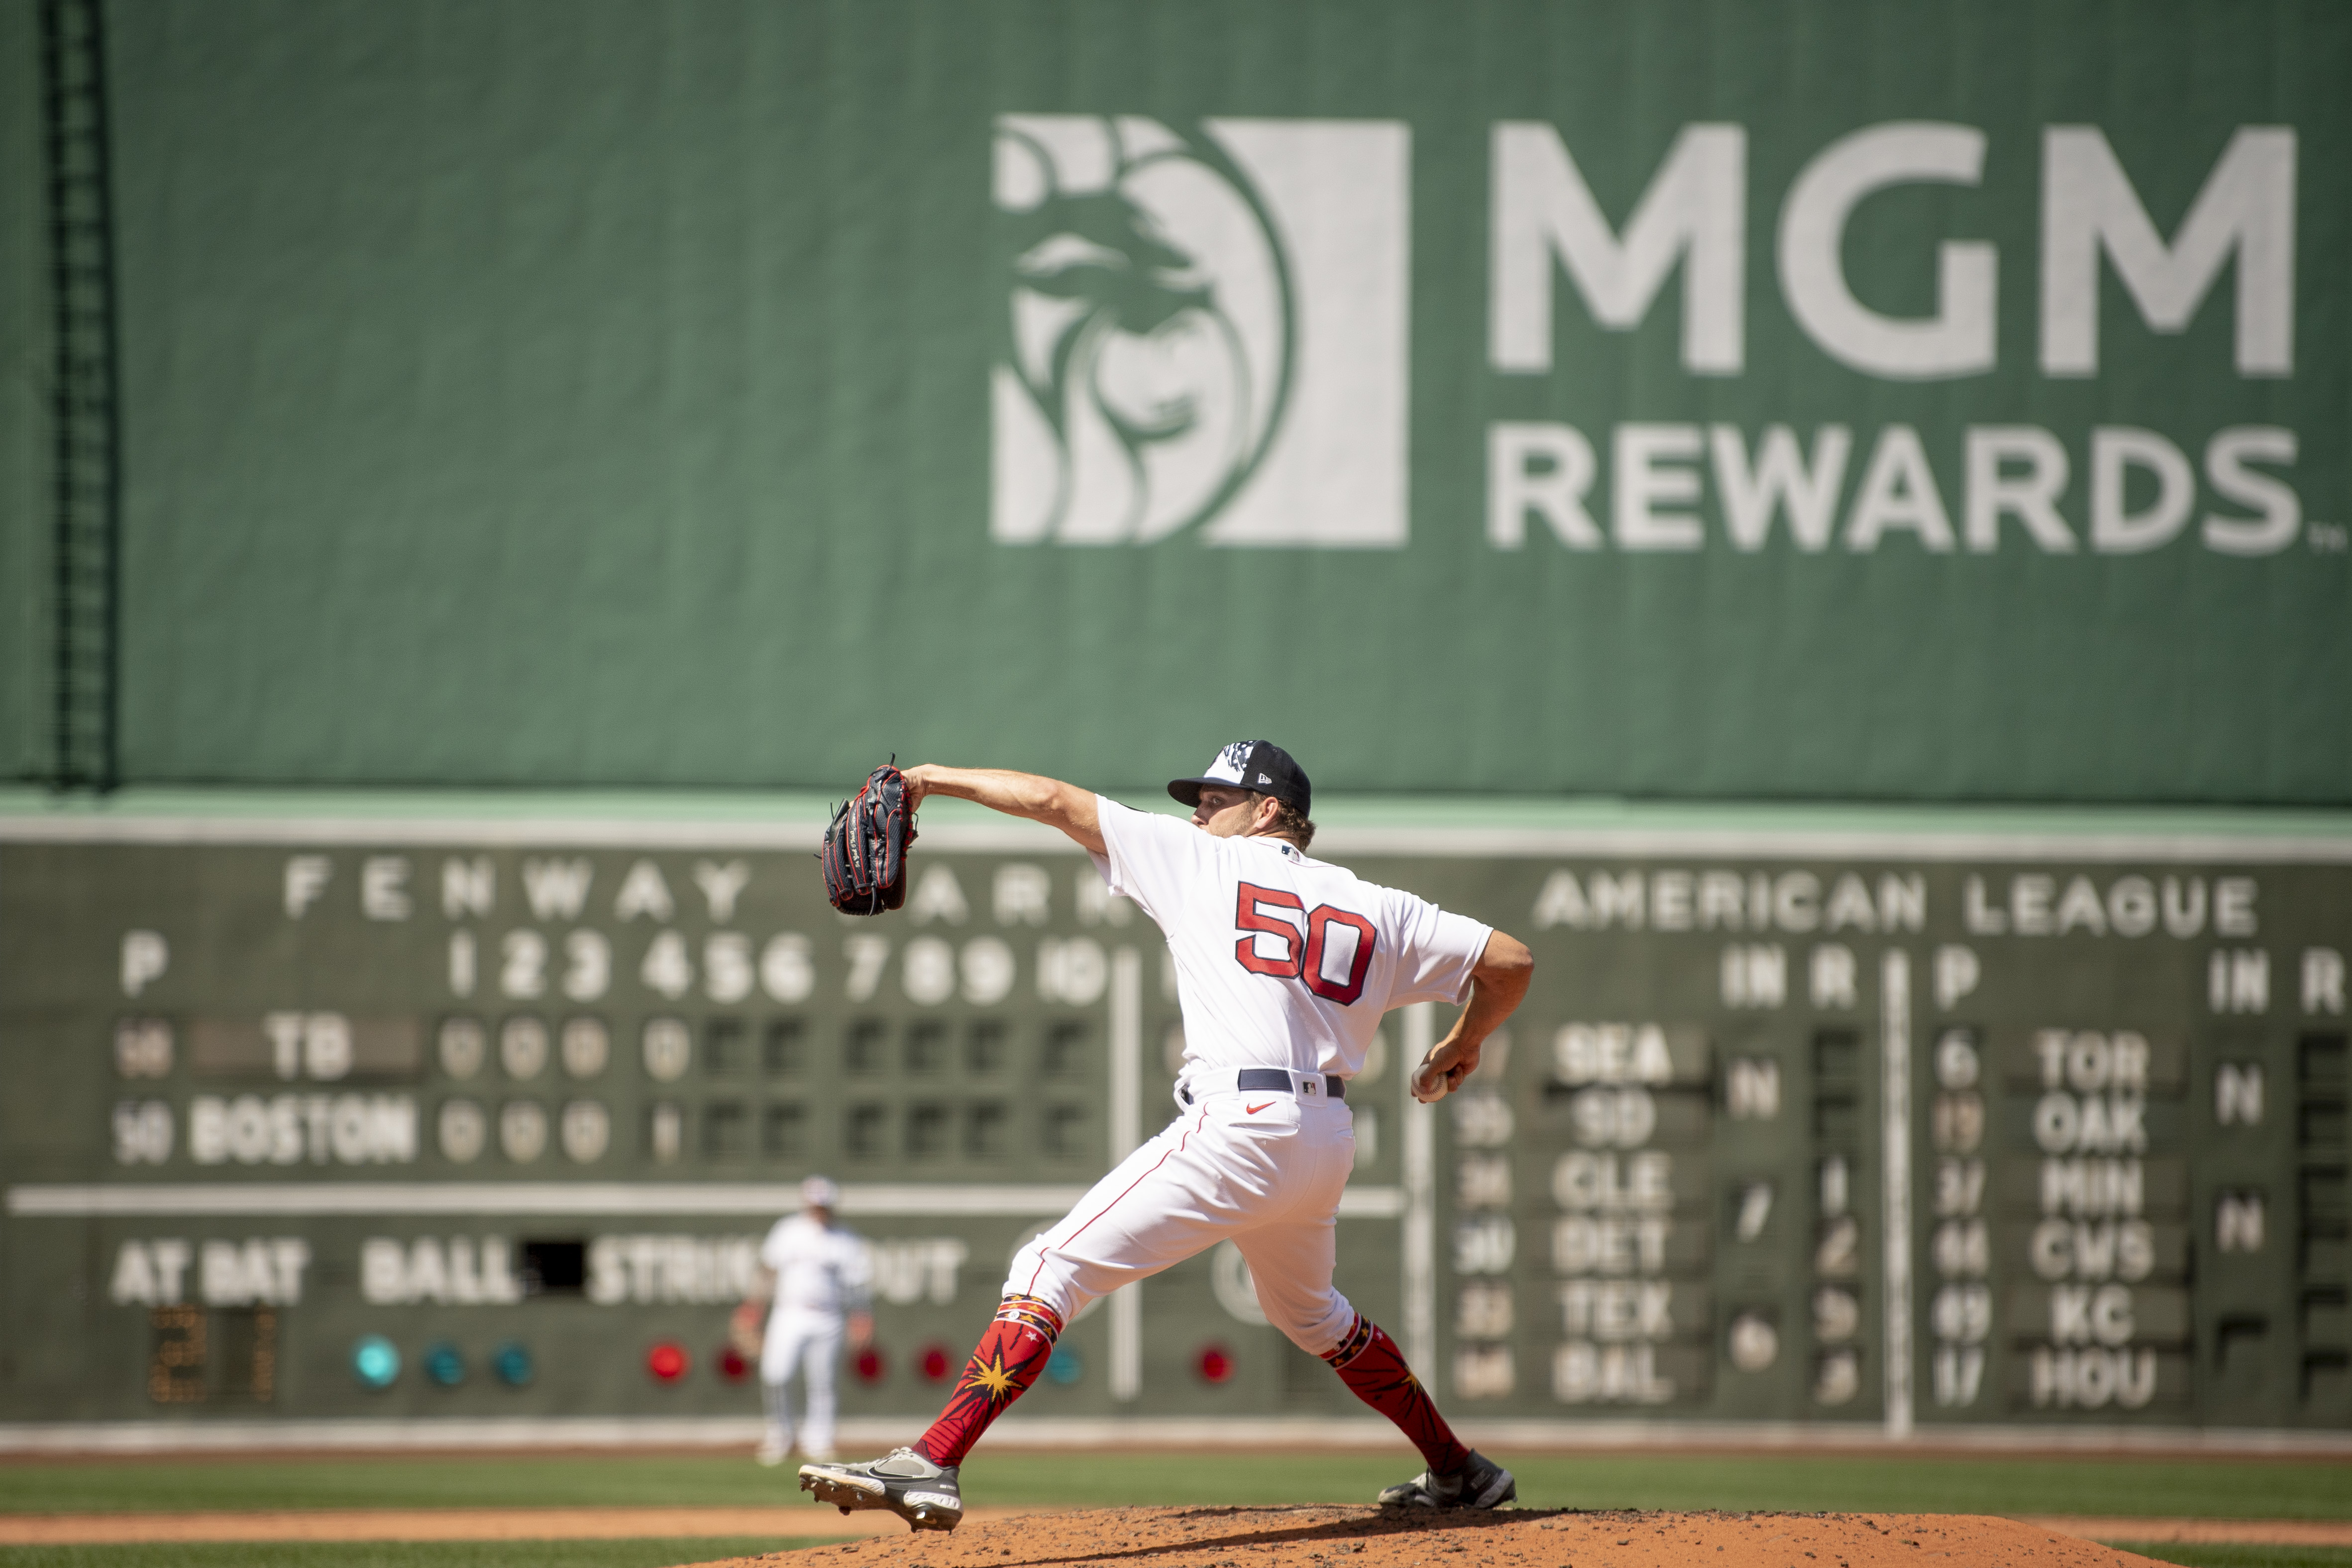 Kutter Crawford will take the mound for the Red Sox as they close out their  series against the Astros at Fenway Park. #AmicaPitchZone…